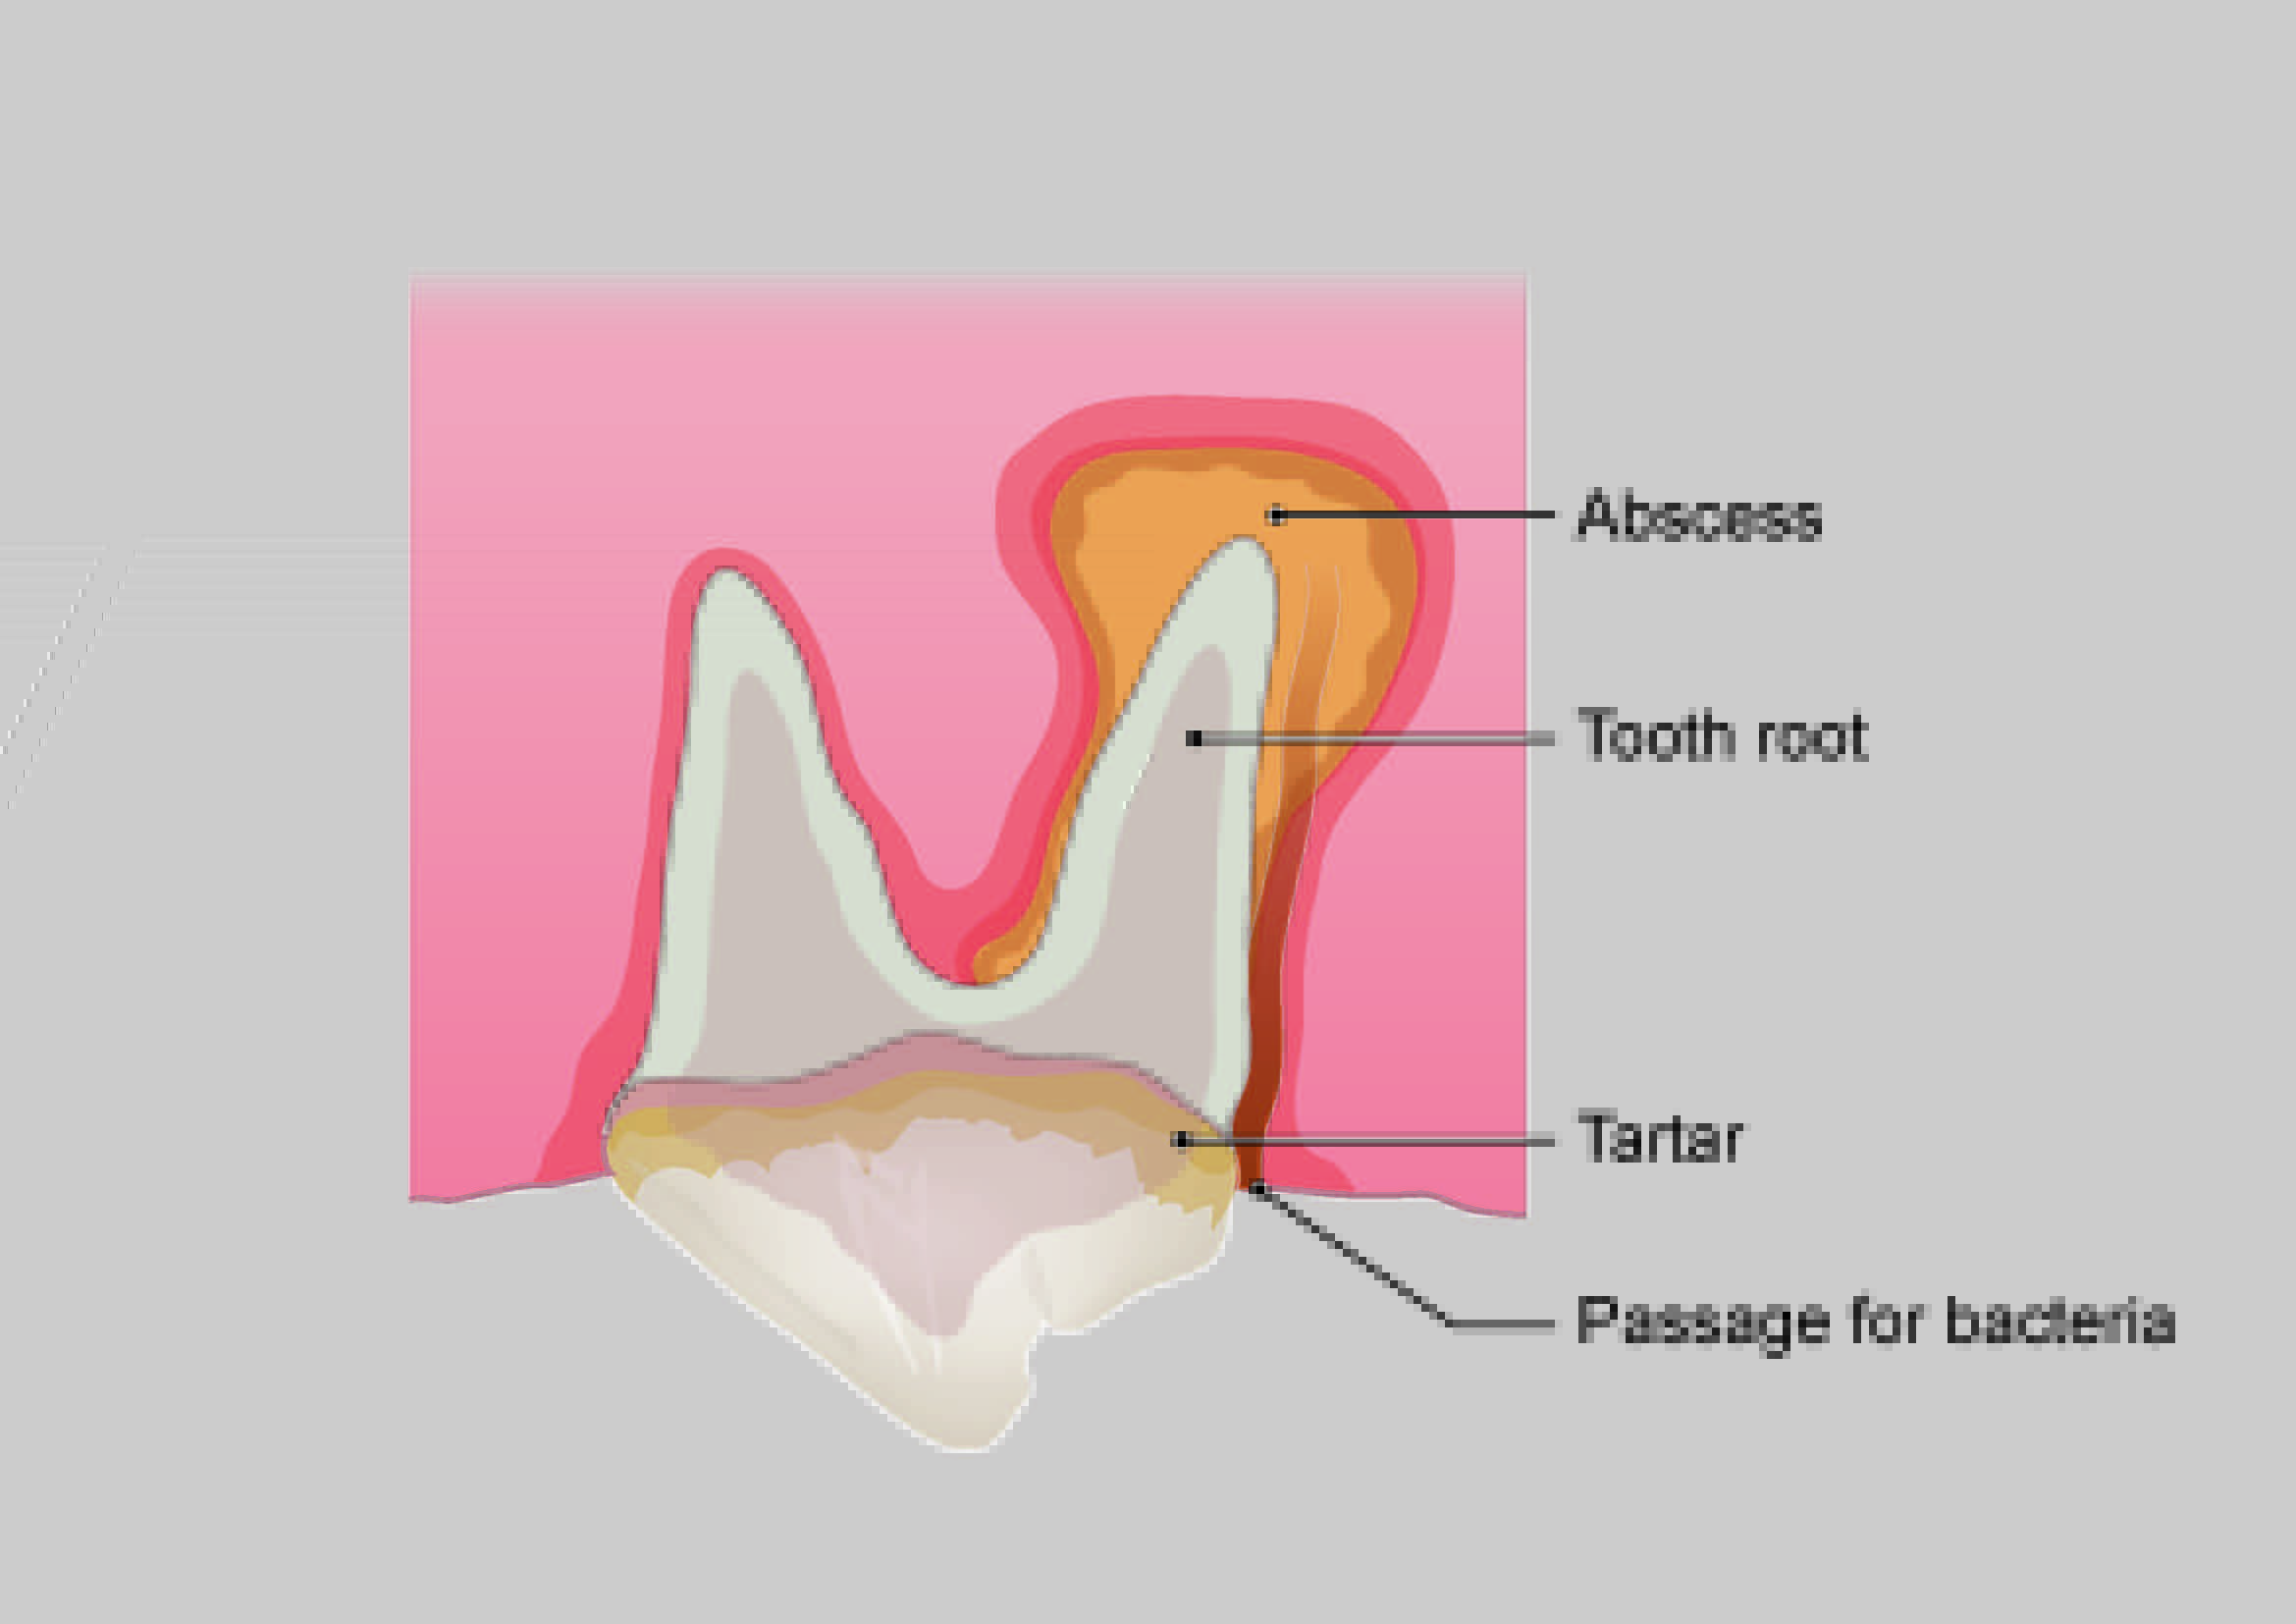 And illustration depicting a tooth rot abscess